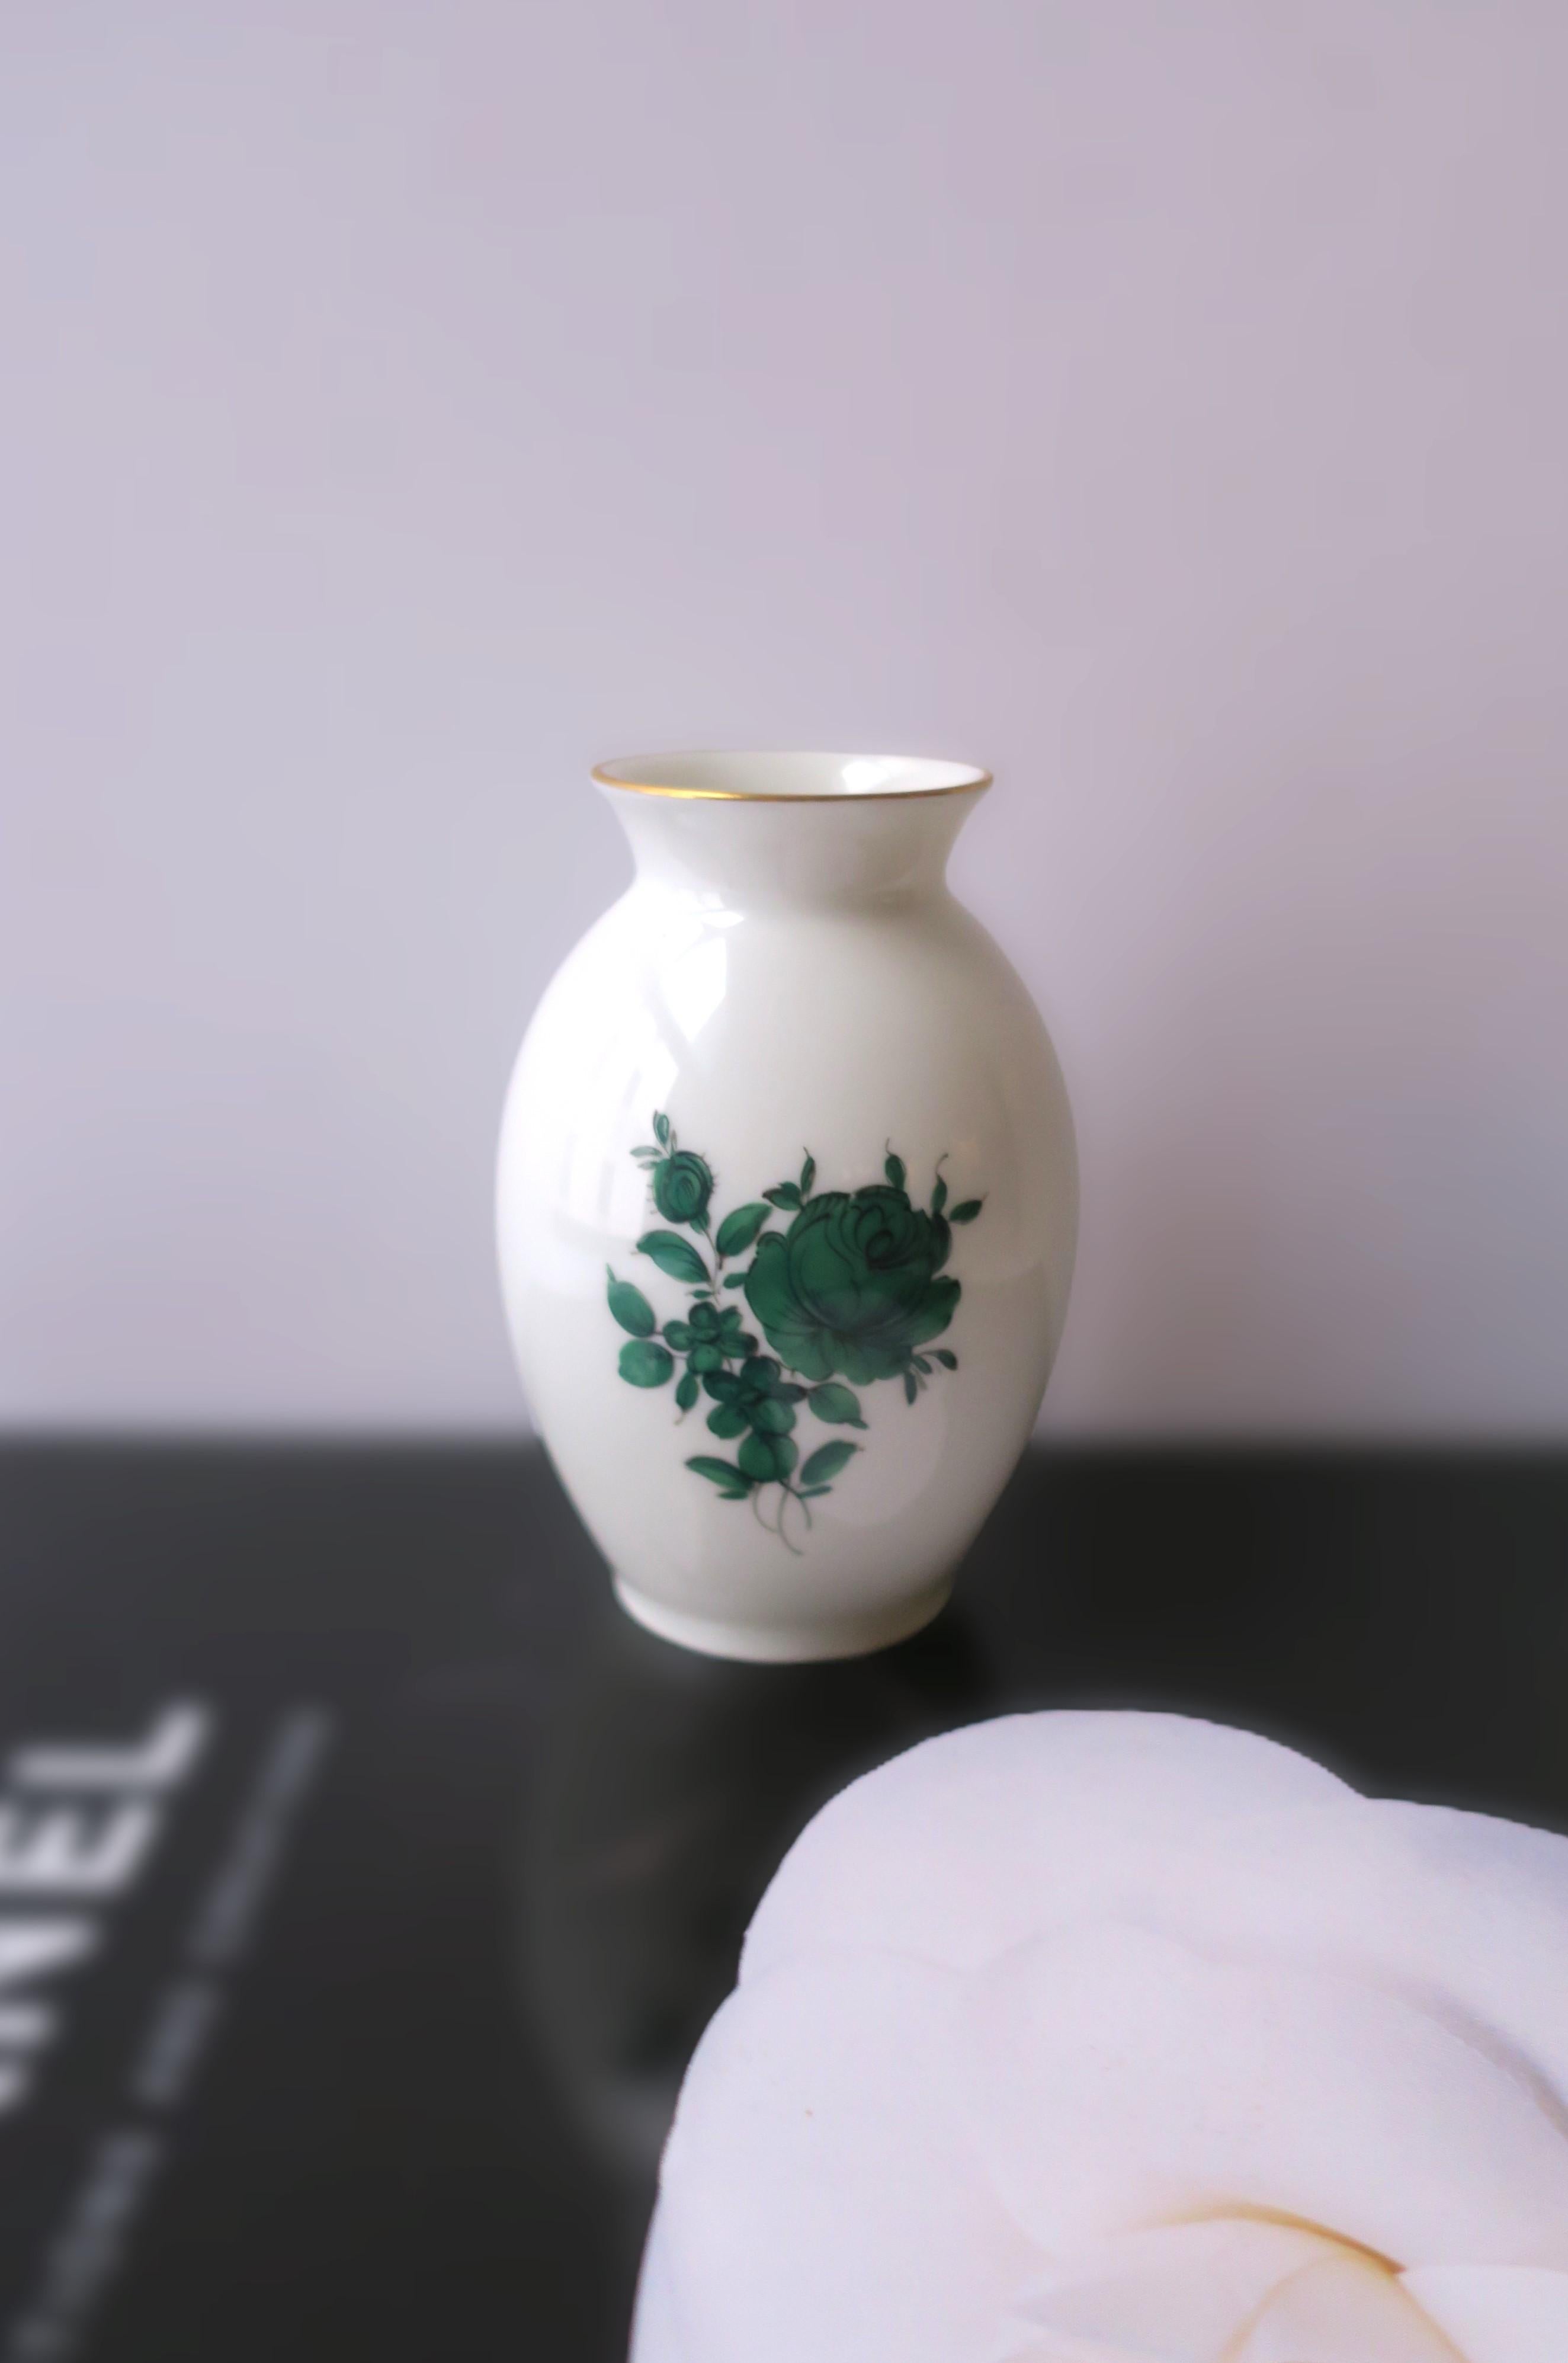 A small Austrian white porcelain vase with large emerald green rose flower at center, by Augarten Porzellanmanufaktur, circa late-20th century, Vienna, Austria. The perfect accent vase with center rose flower accompanied by smaller flowers and